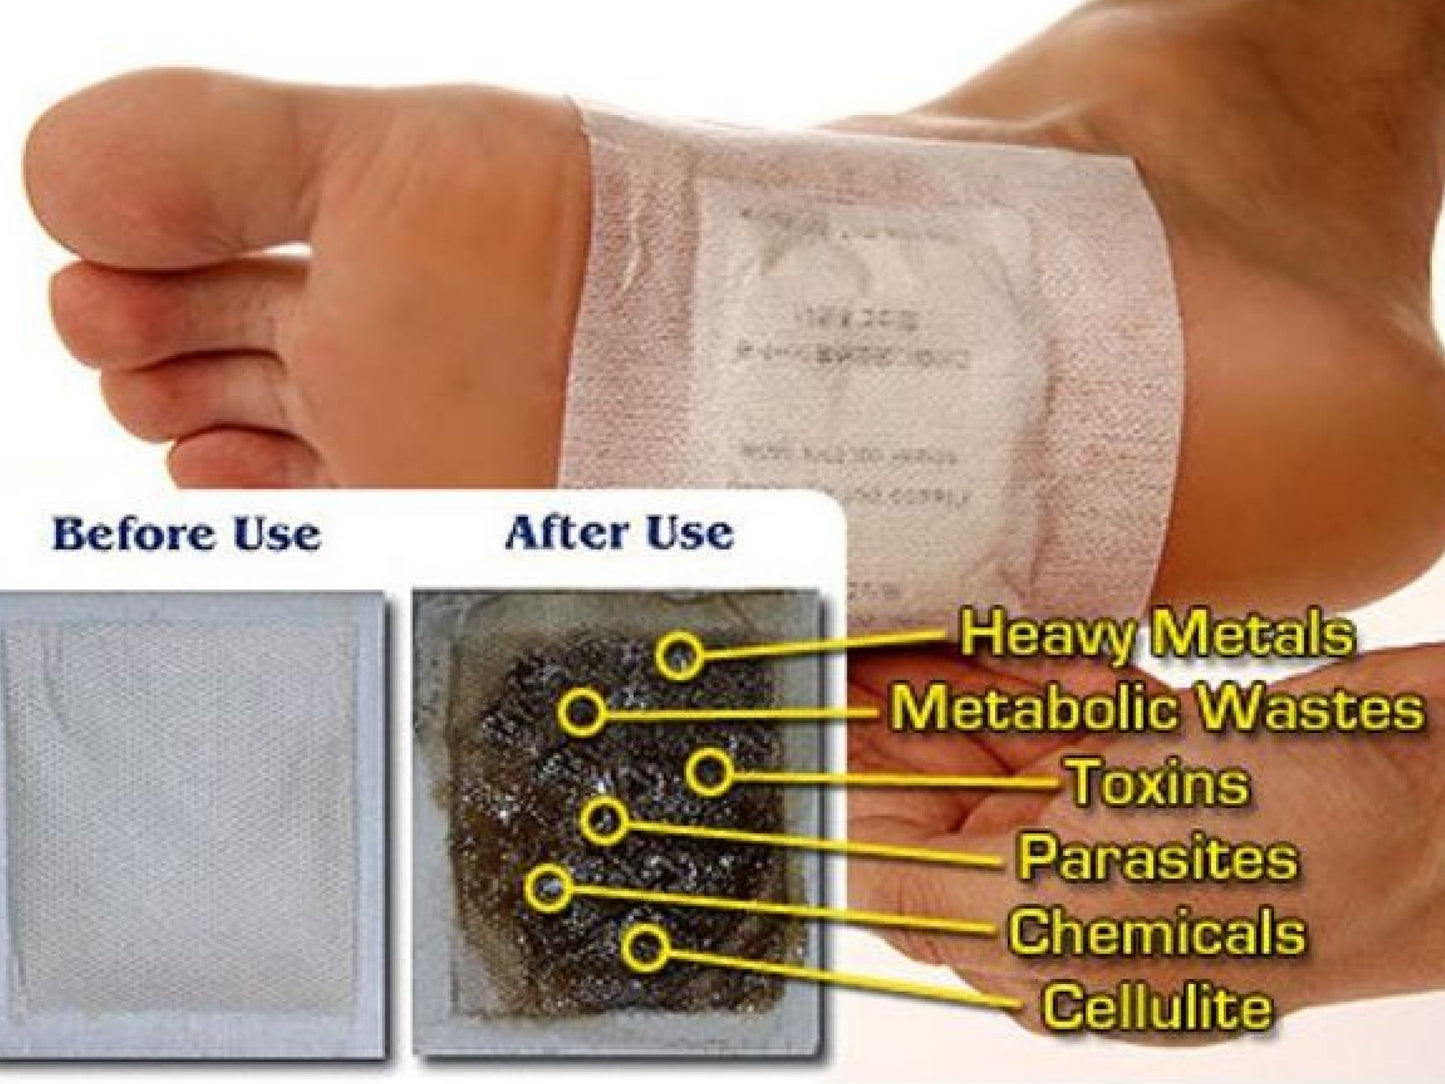 Organic Herbal Detox Foot Pads - Back To Nature Brand - Detoxify Your Body While You Sleep! Best Price & Fast Shipping!